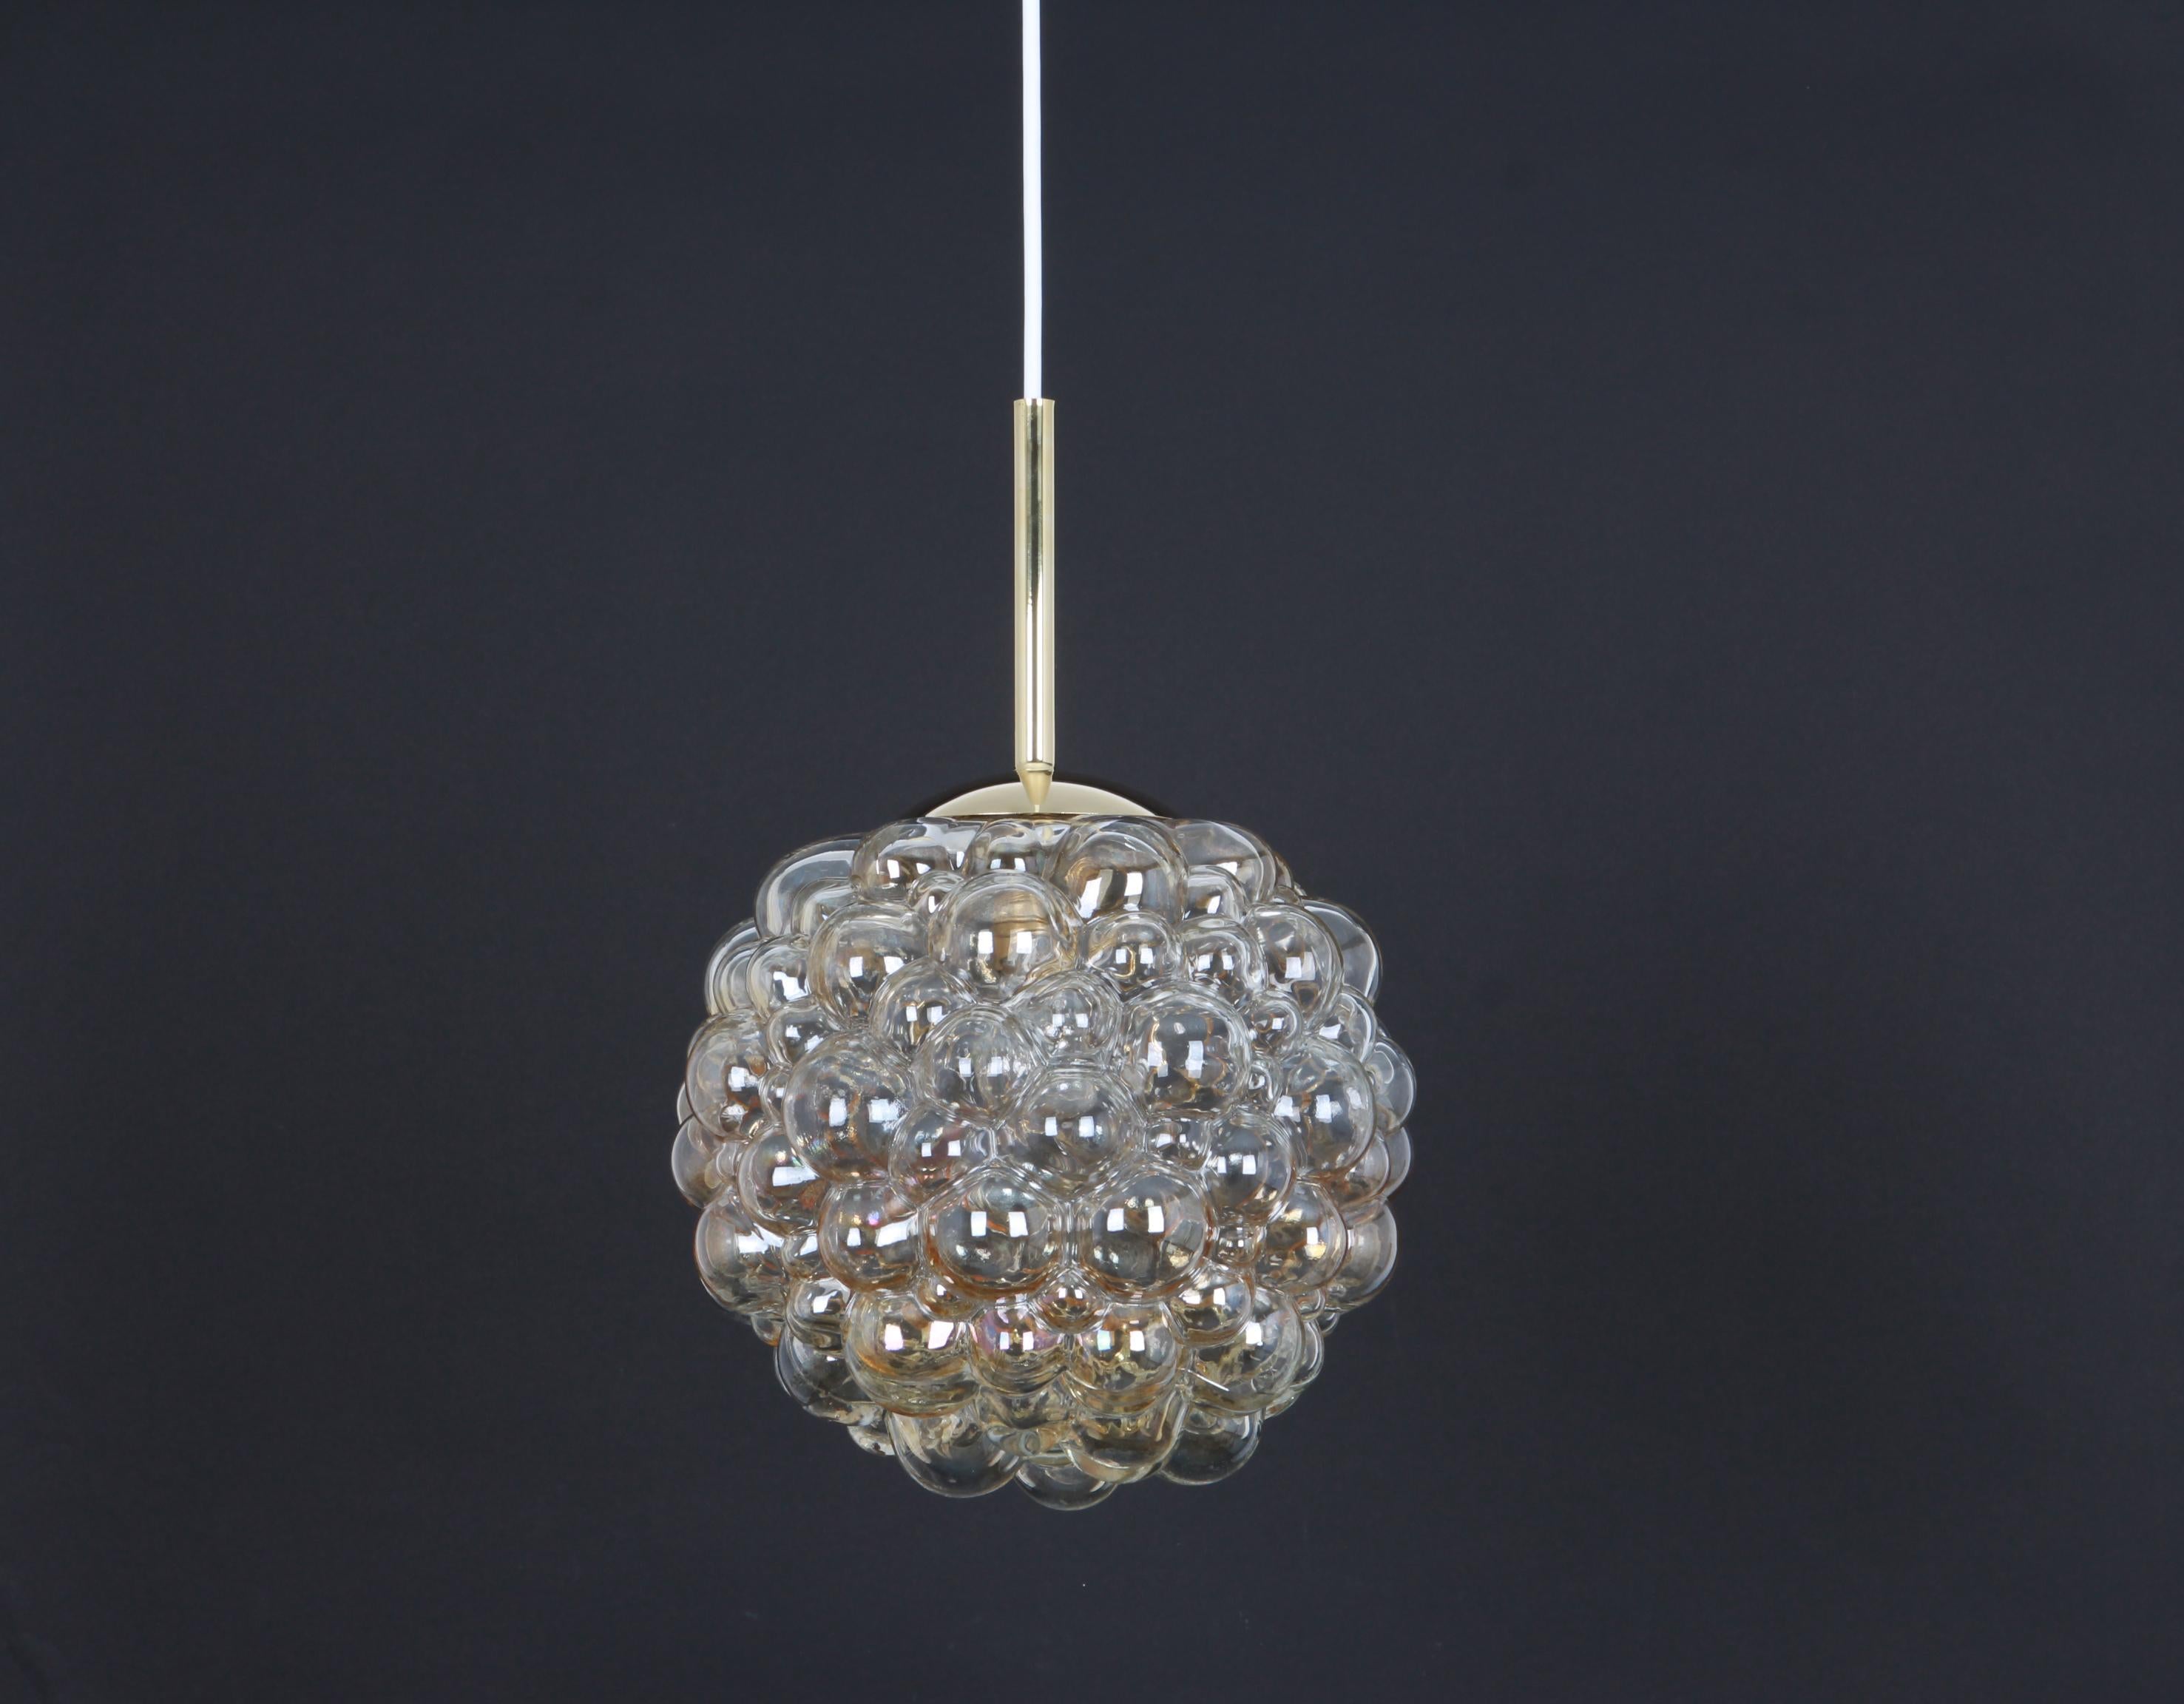 A large round with light smoke tone bubble glass pendant designed by Helena Tynell for Limburg, manufactured in Germany, circa 1970s

Sockets: It needs 1 x E27 standard bulb.
Measure: Diameter 30 cm // 12 inches
Height (adjustable) 80 cm // 31.5